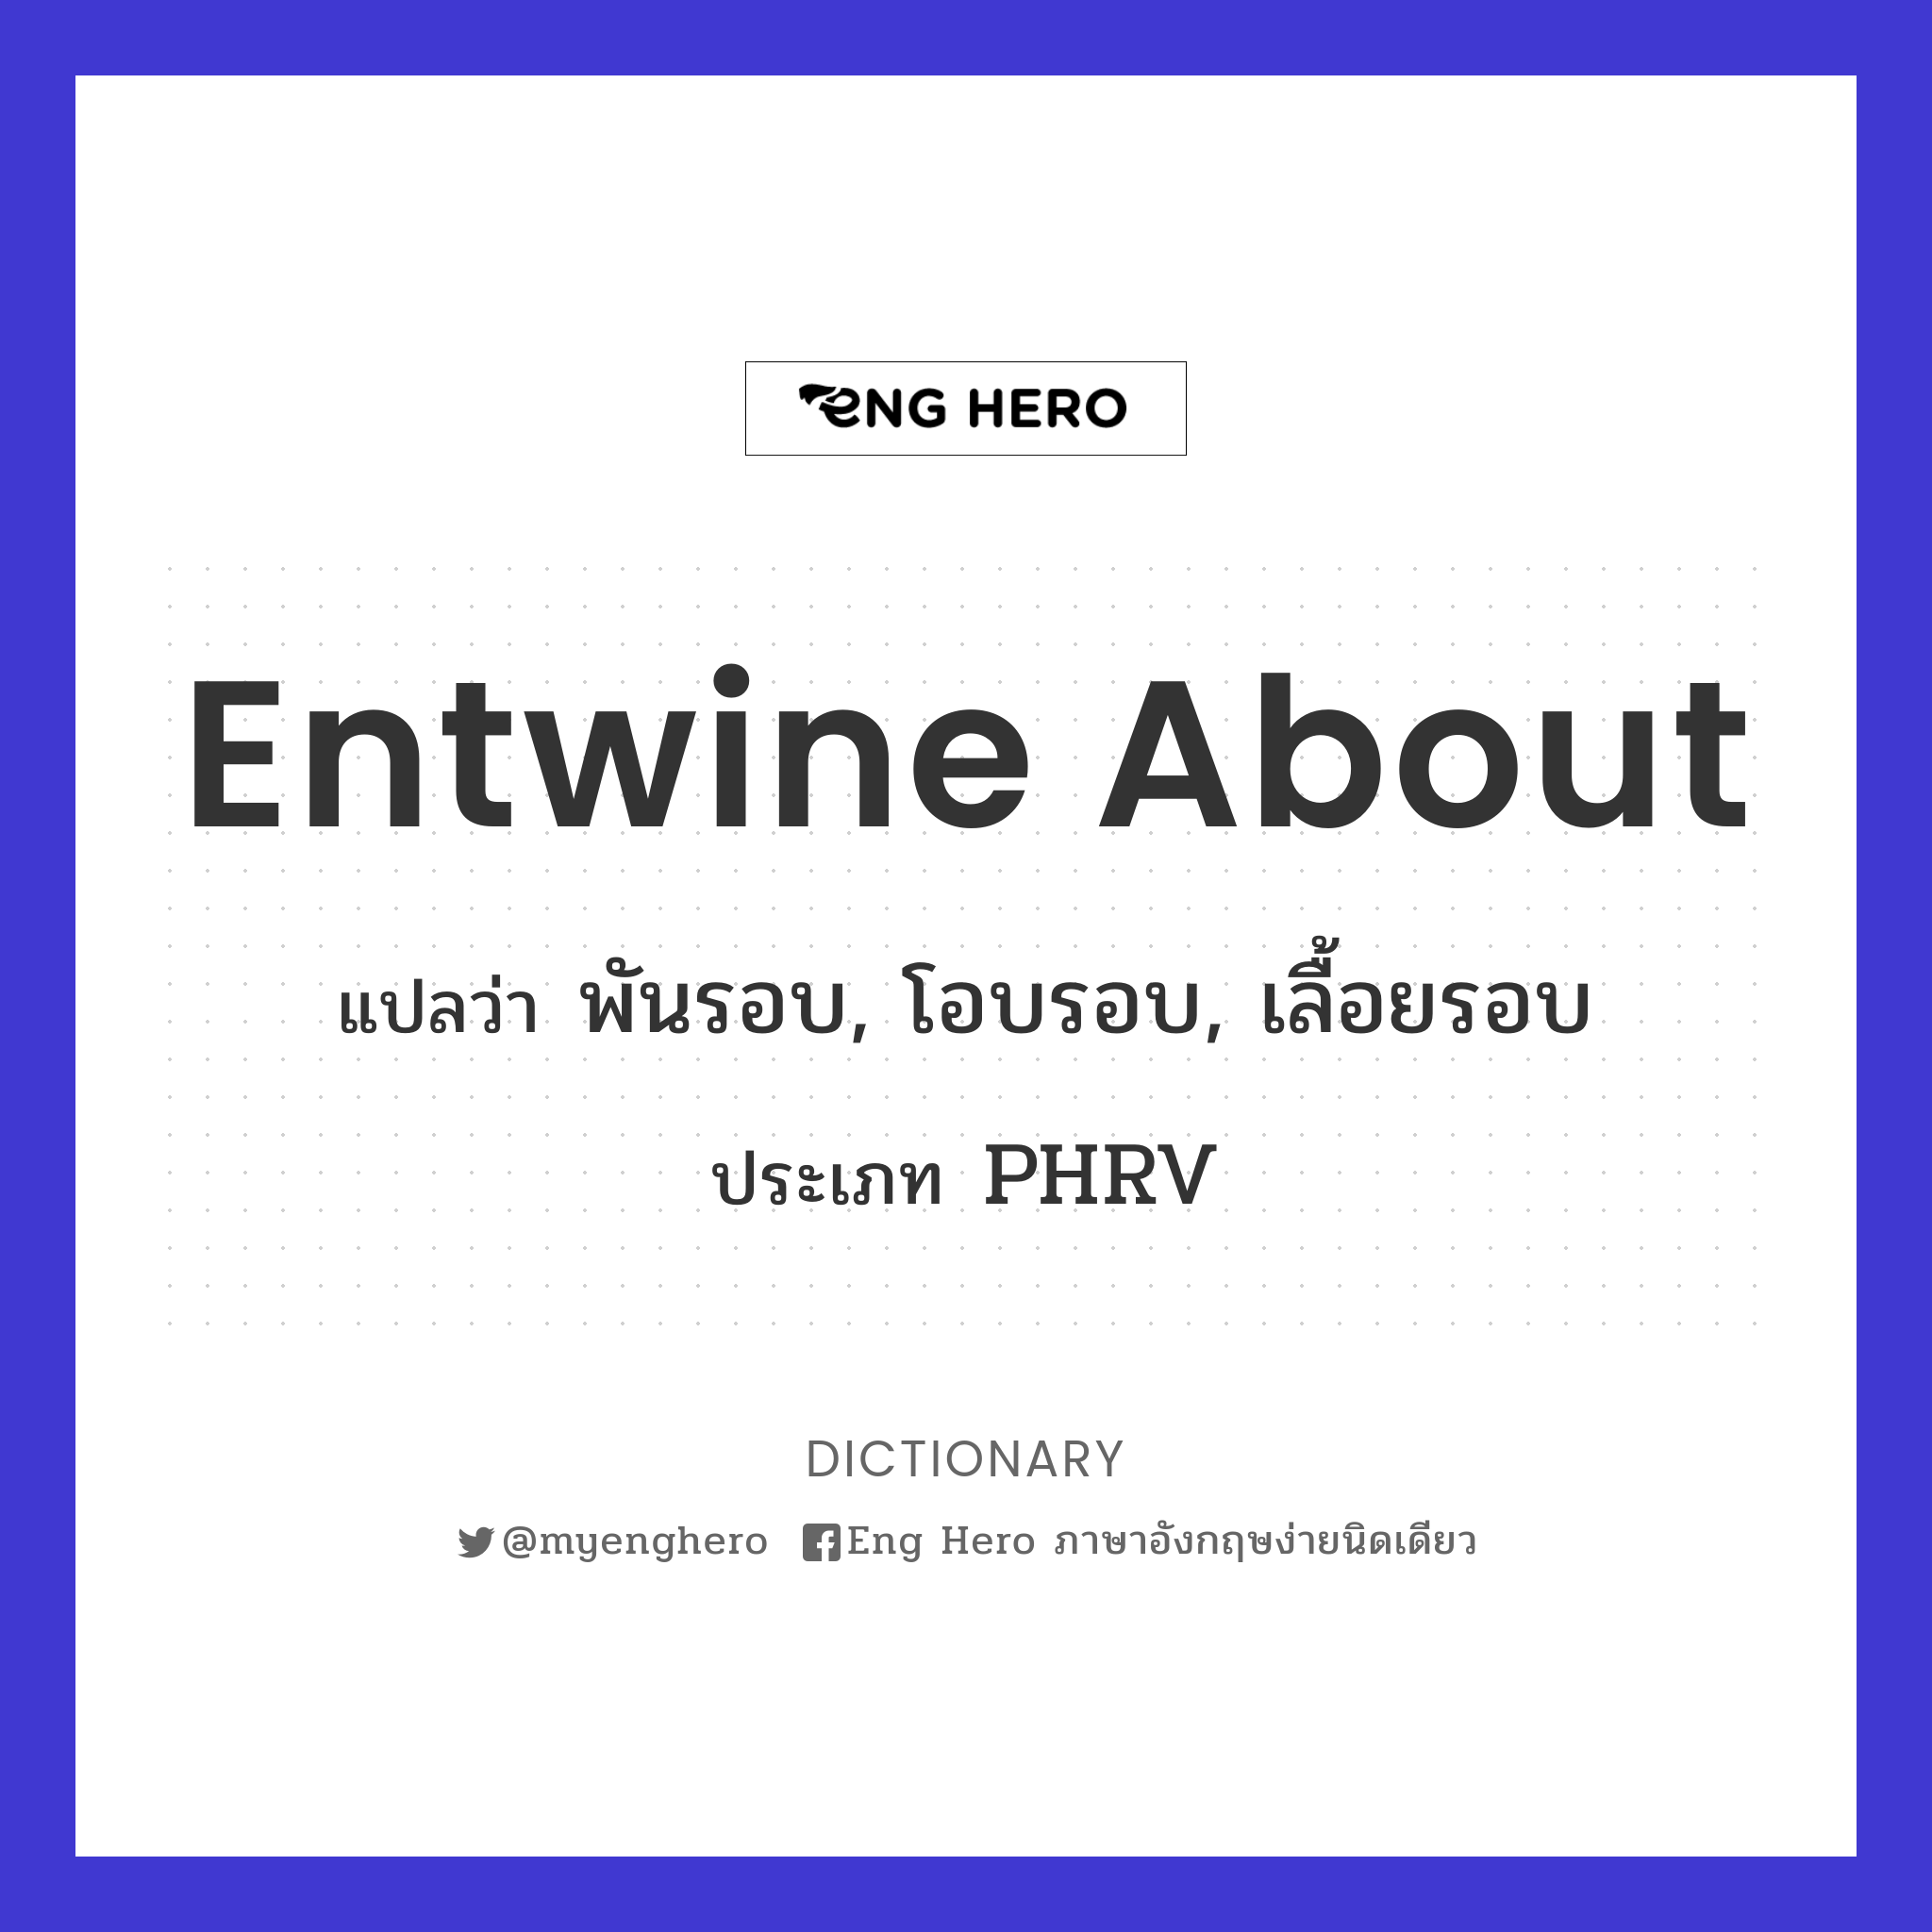 entwine about